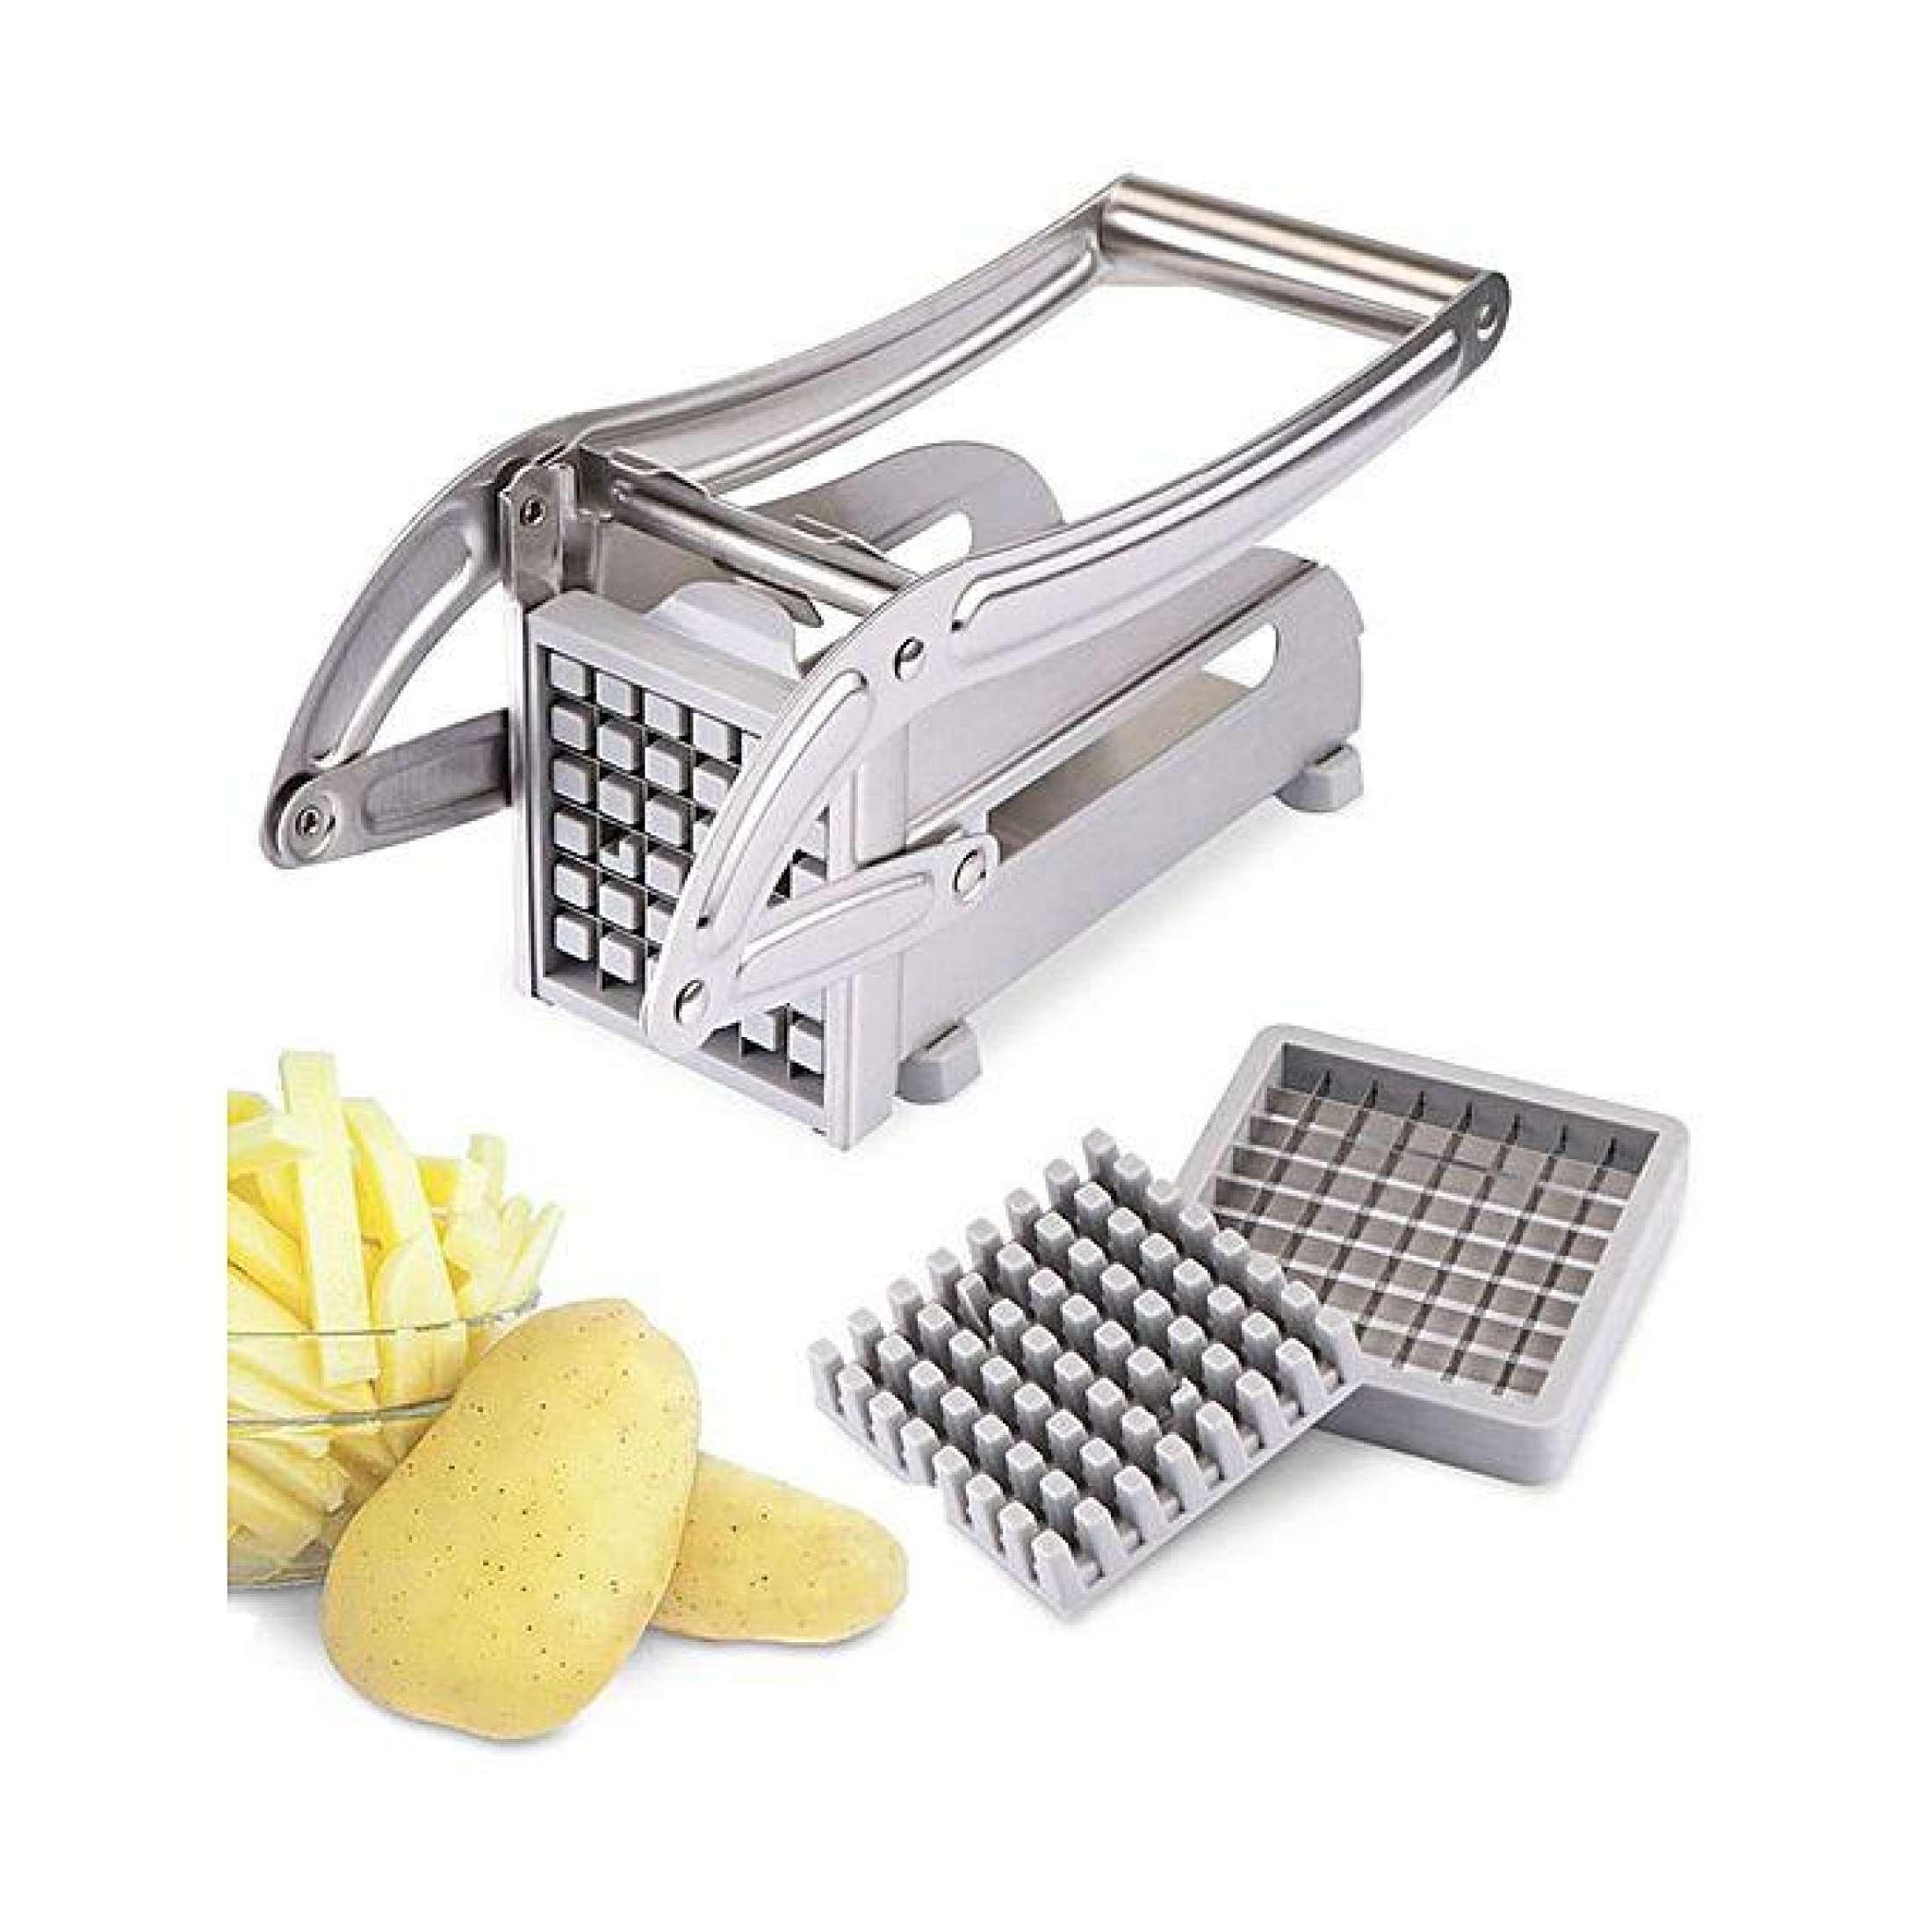 https://thelootsale.com/cdn/shop/files/potato-chipper-french-fry-chips-cutter-or-vegetable-and-french-fry-cutter-or-stainless-steel-slicer-thelootsale-1_84e01dea-6c4a-404f-9c8c-6e298ab42214.jpg?v=1697280859